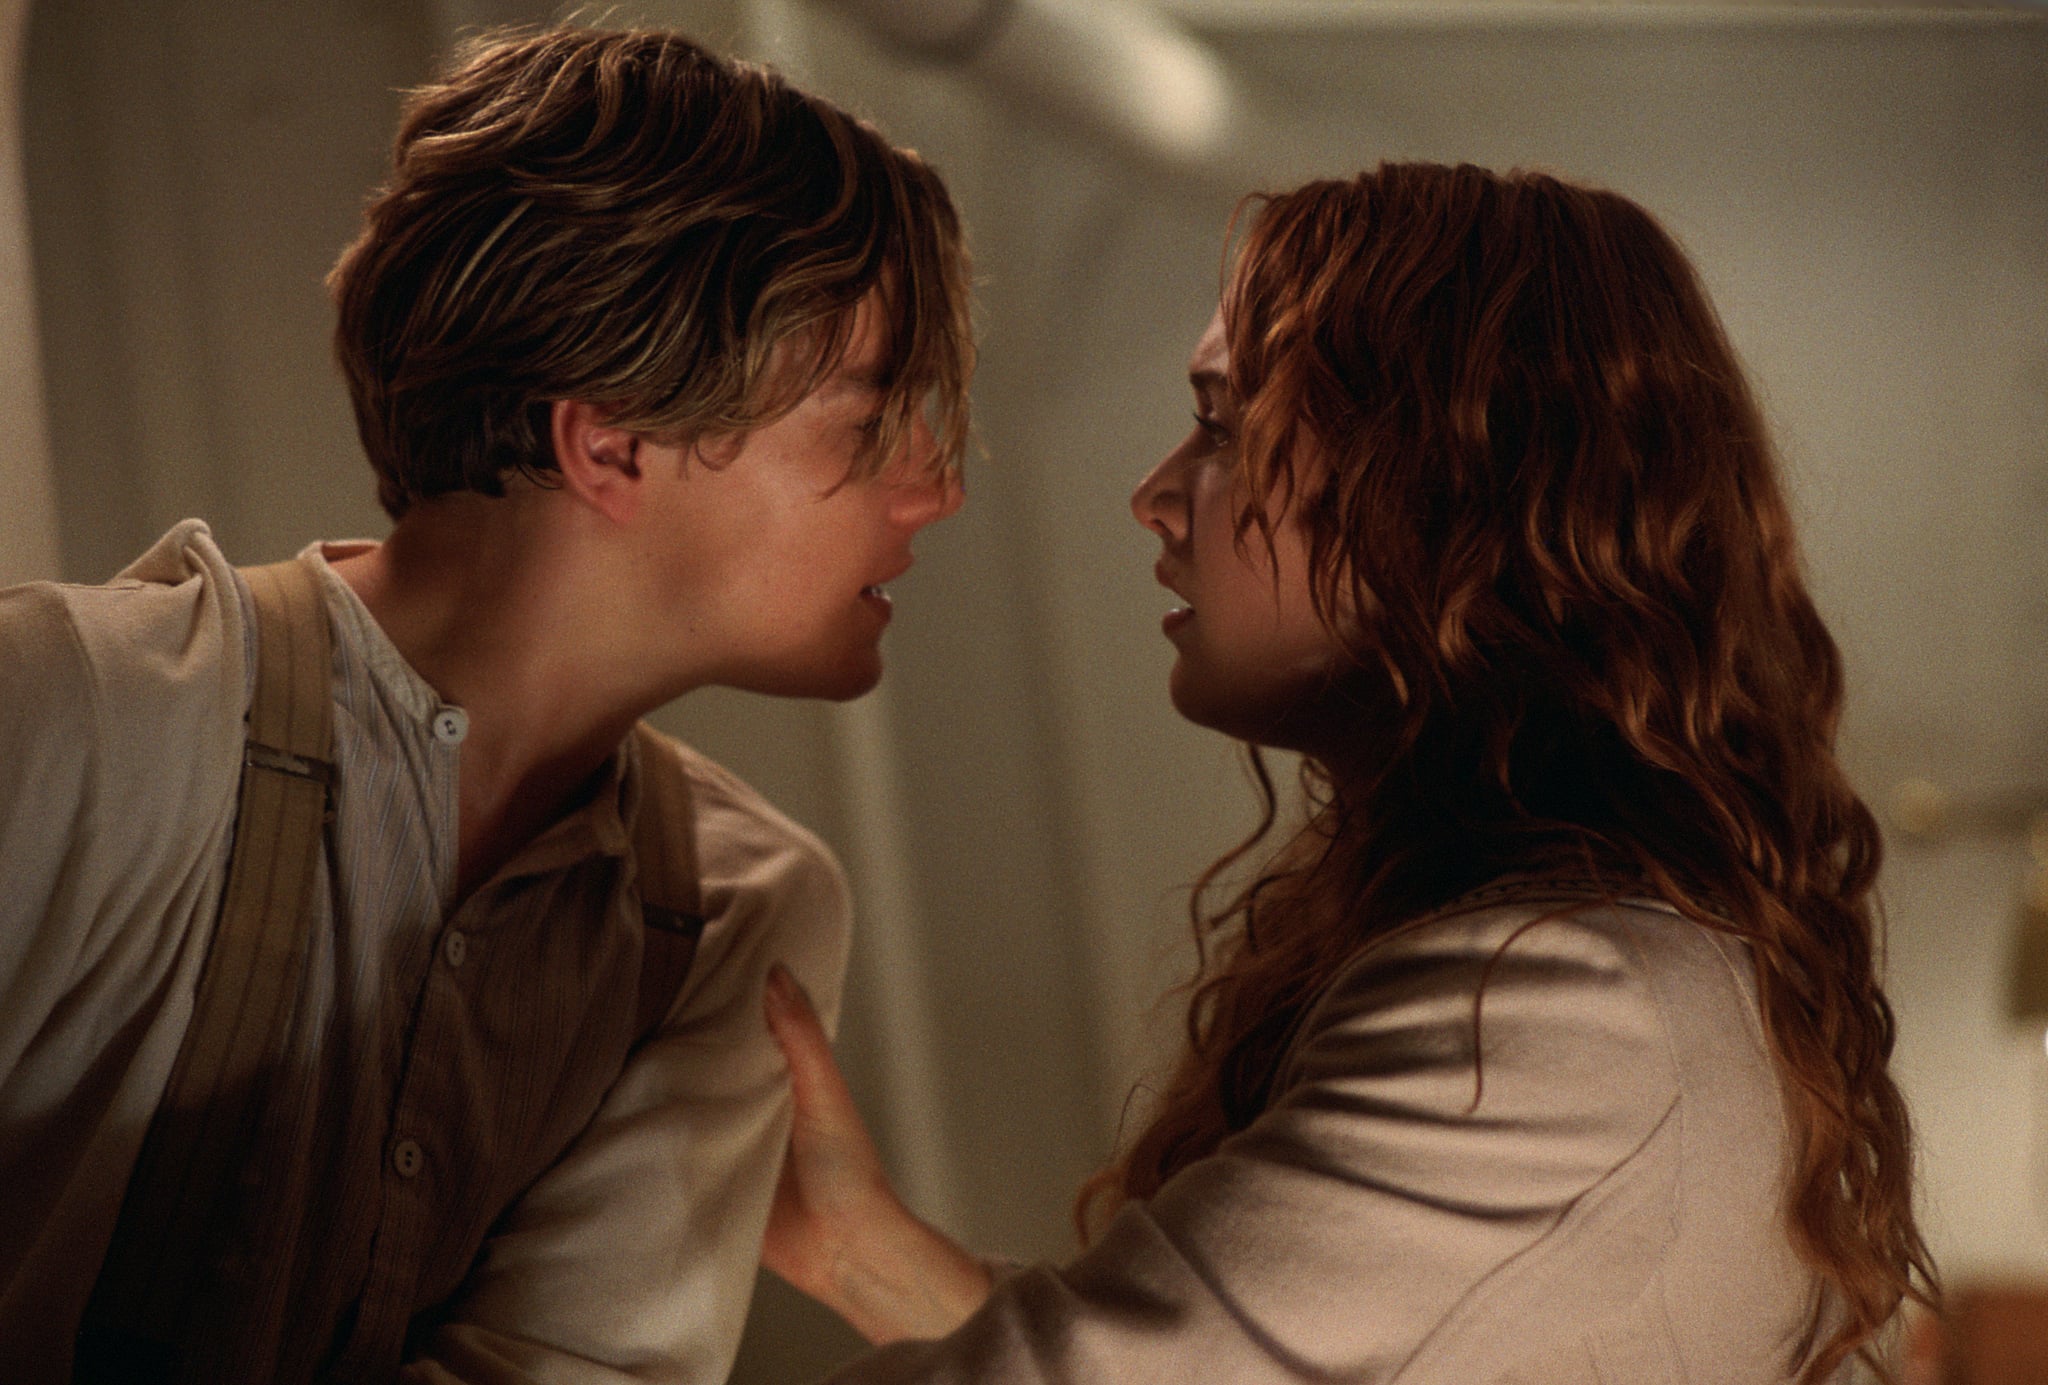 Leonardo DiCaprio and Kate Winslet in Titanic. | The Original Titanic  Pictures Will Make You Swoon Even Harder After 20 Years | POPSUGAR  Entertainment Photo 26